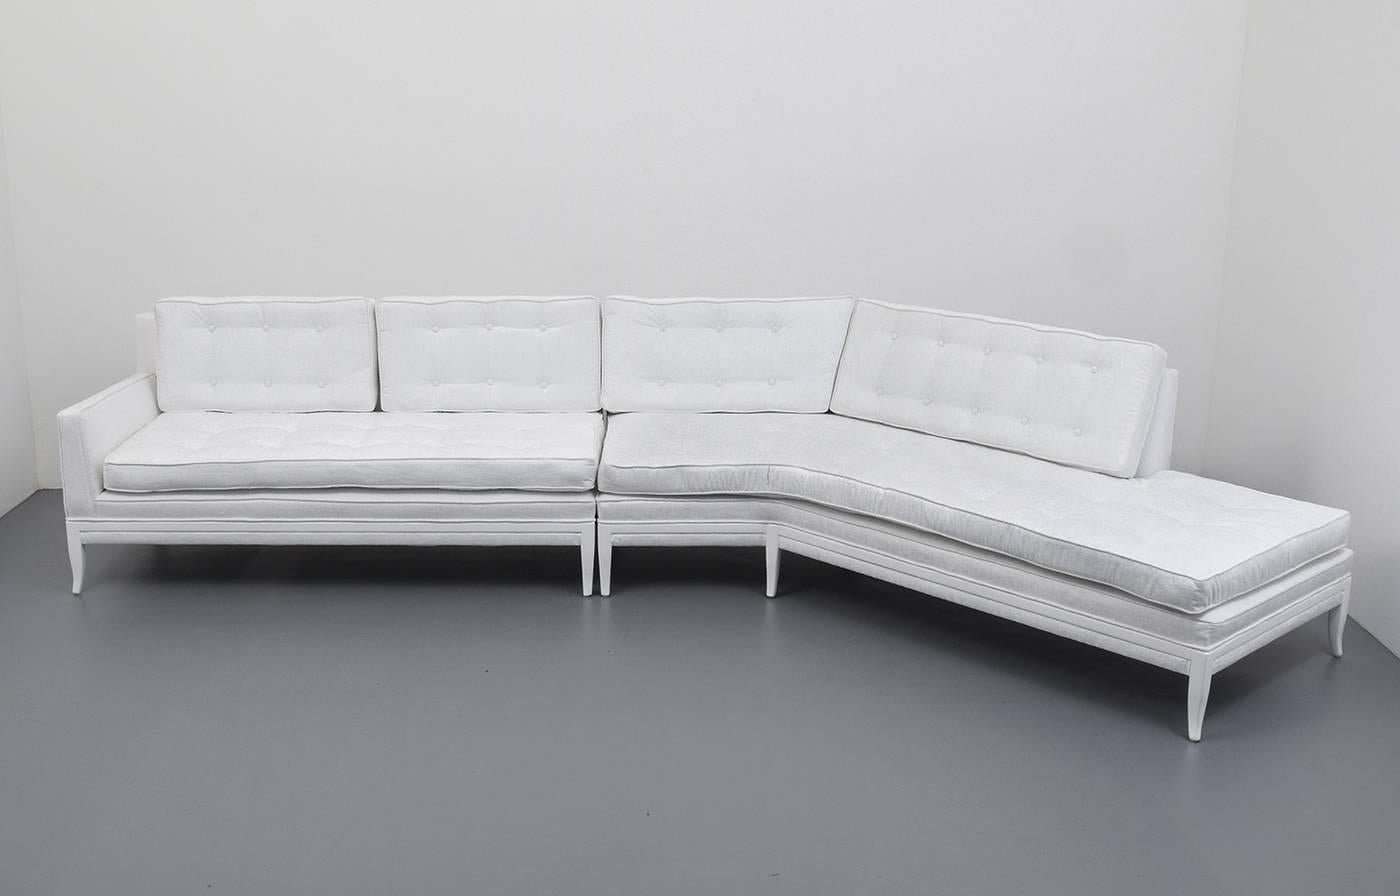 Large two-piece sectional sofa by Tommi Parzinger for Parzinger Originals. The sofa has been refinished and reupholstered.  Provenance:  Rago Arts, Lot 718, 9.23.2017.

Tommi Parzinger's meticulous detail in his early work as a silversmith was